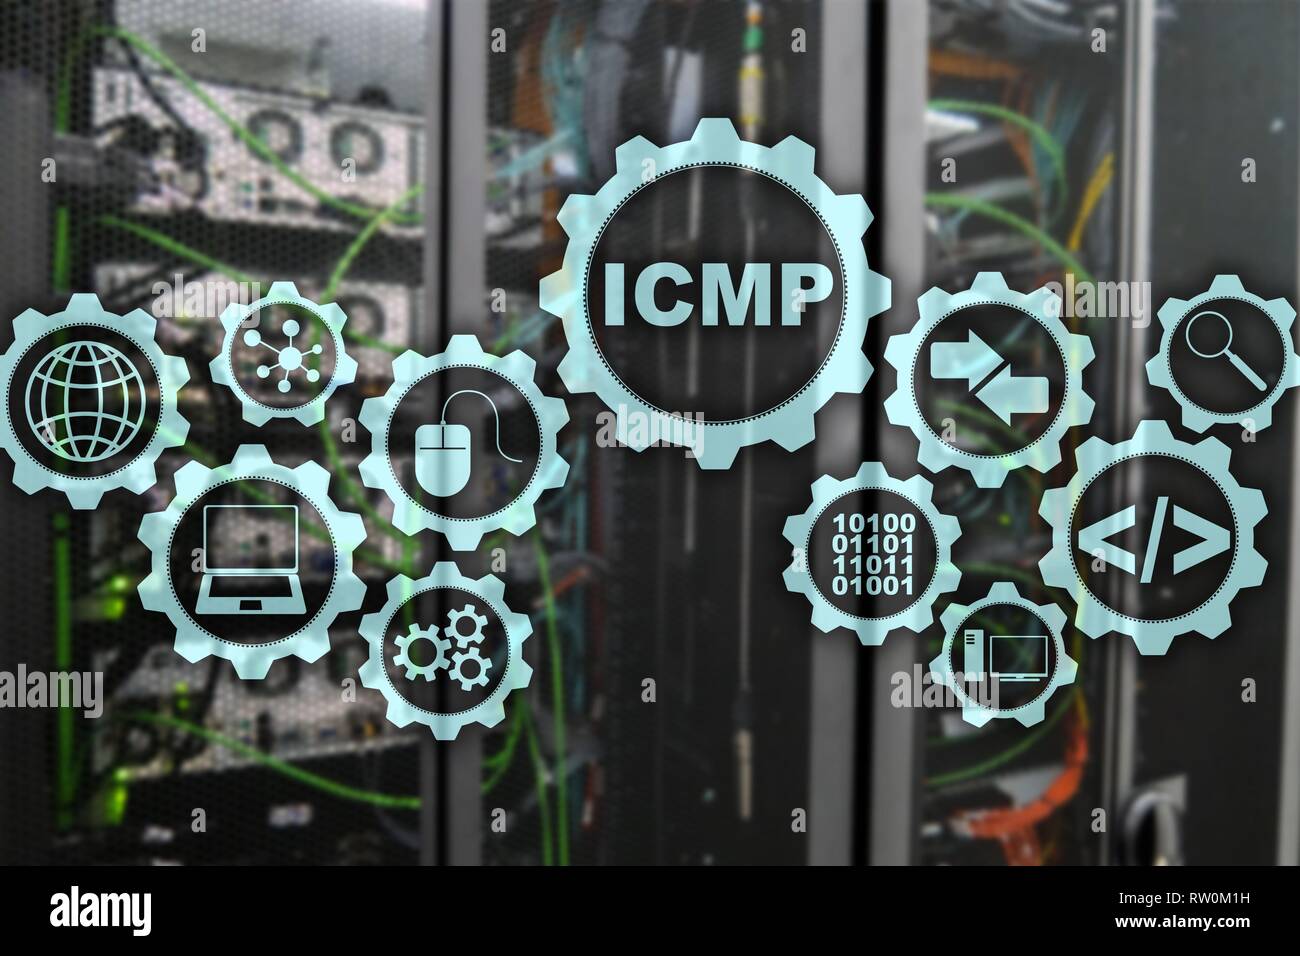 ICMP. Internet Control Message Protocol. Network concept. Server room on background. Stock Photo